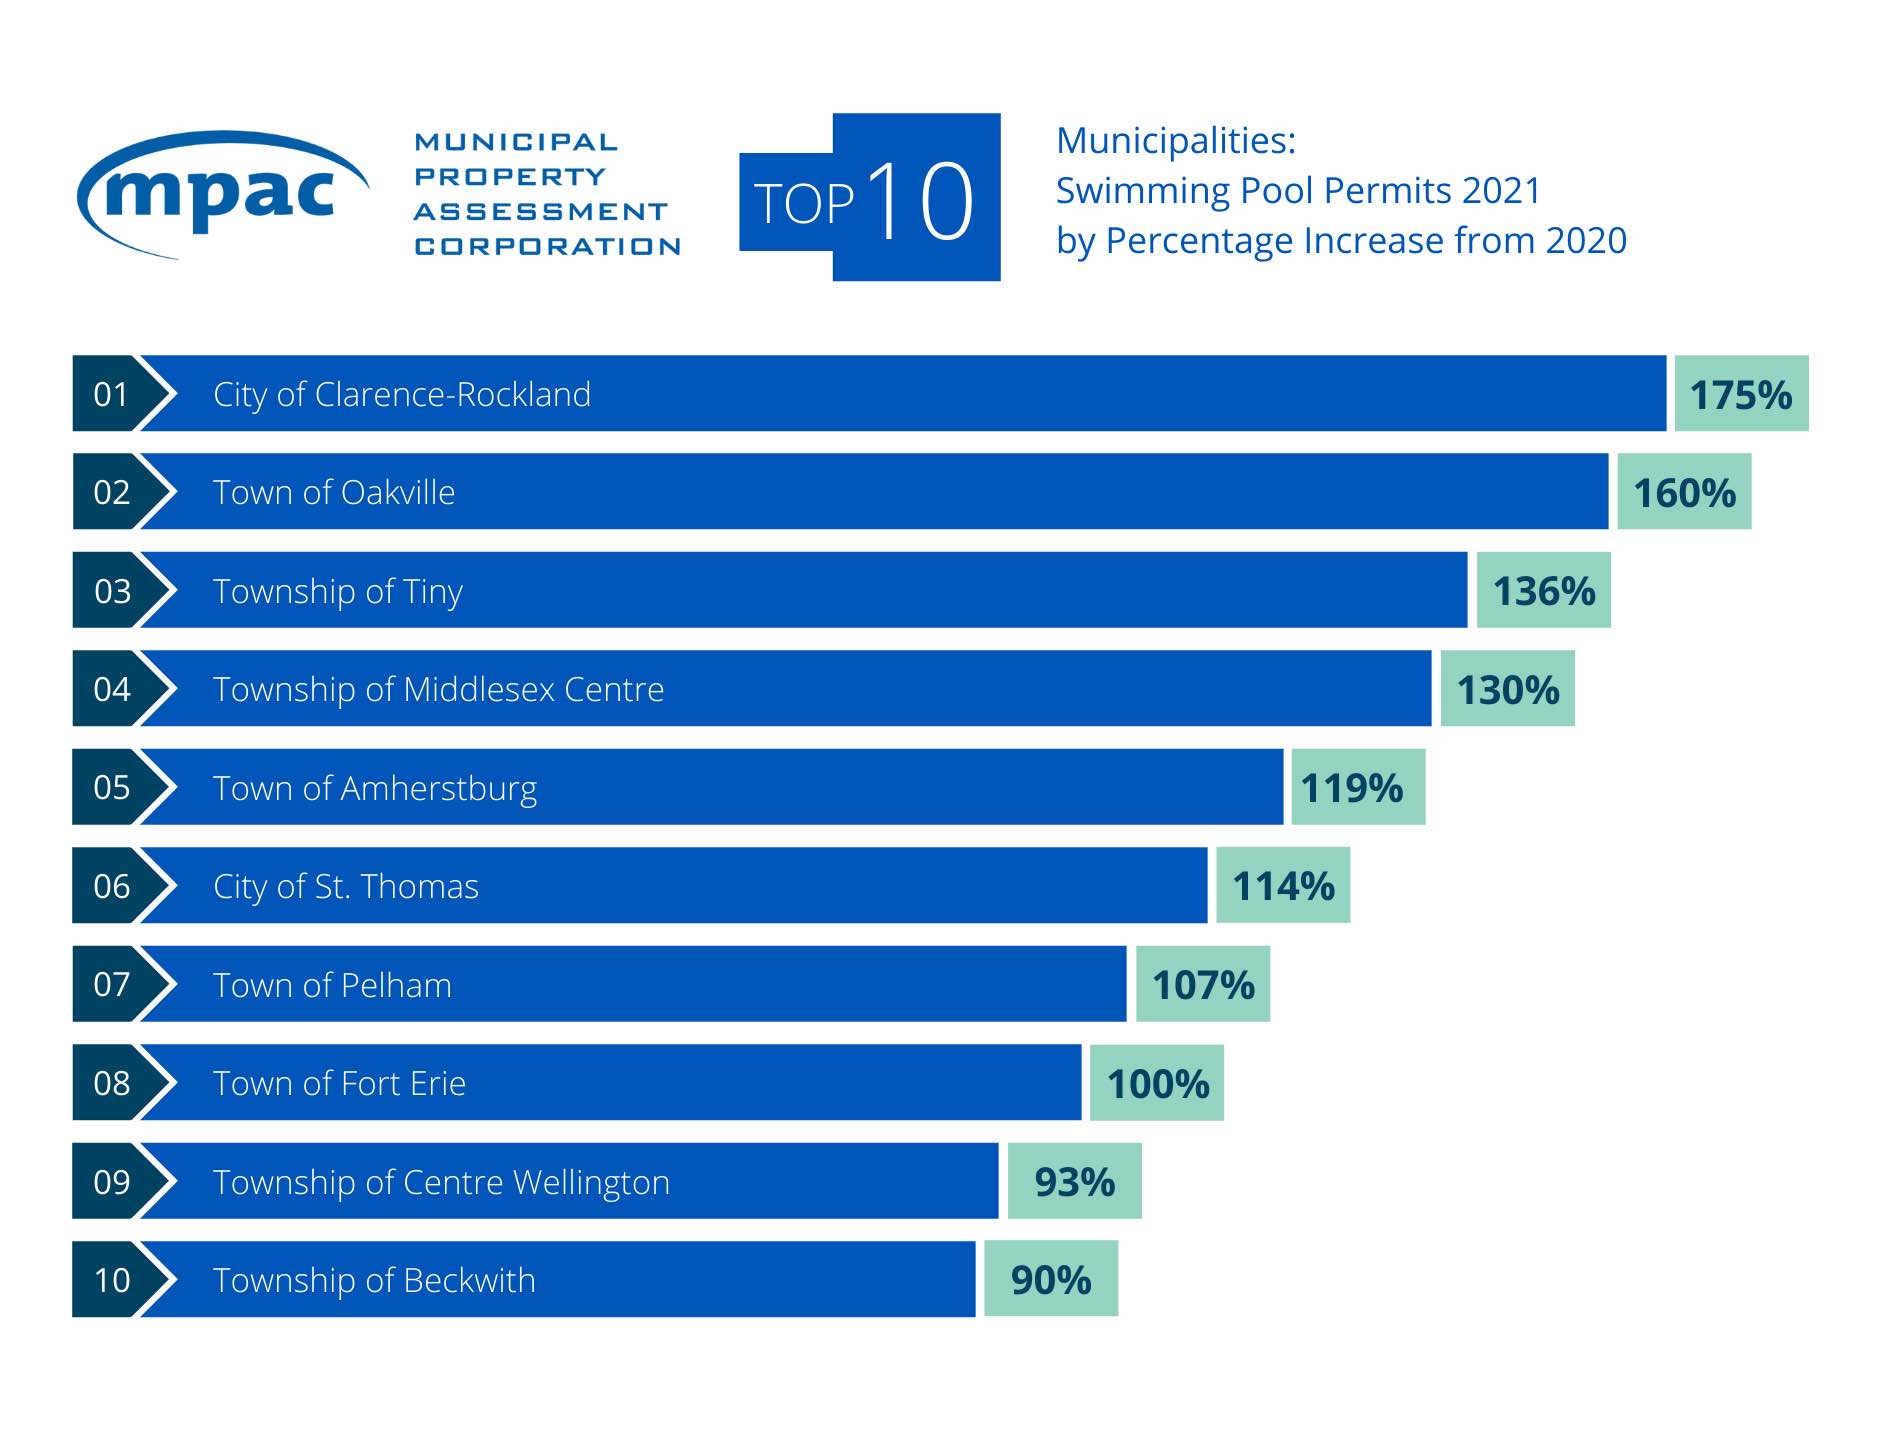 Top 10 Municipalities: Swimming Pool Building Permits 2021 by Percentage Increase from 2020